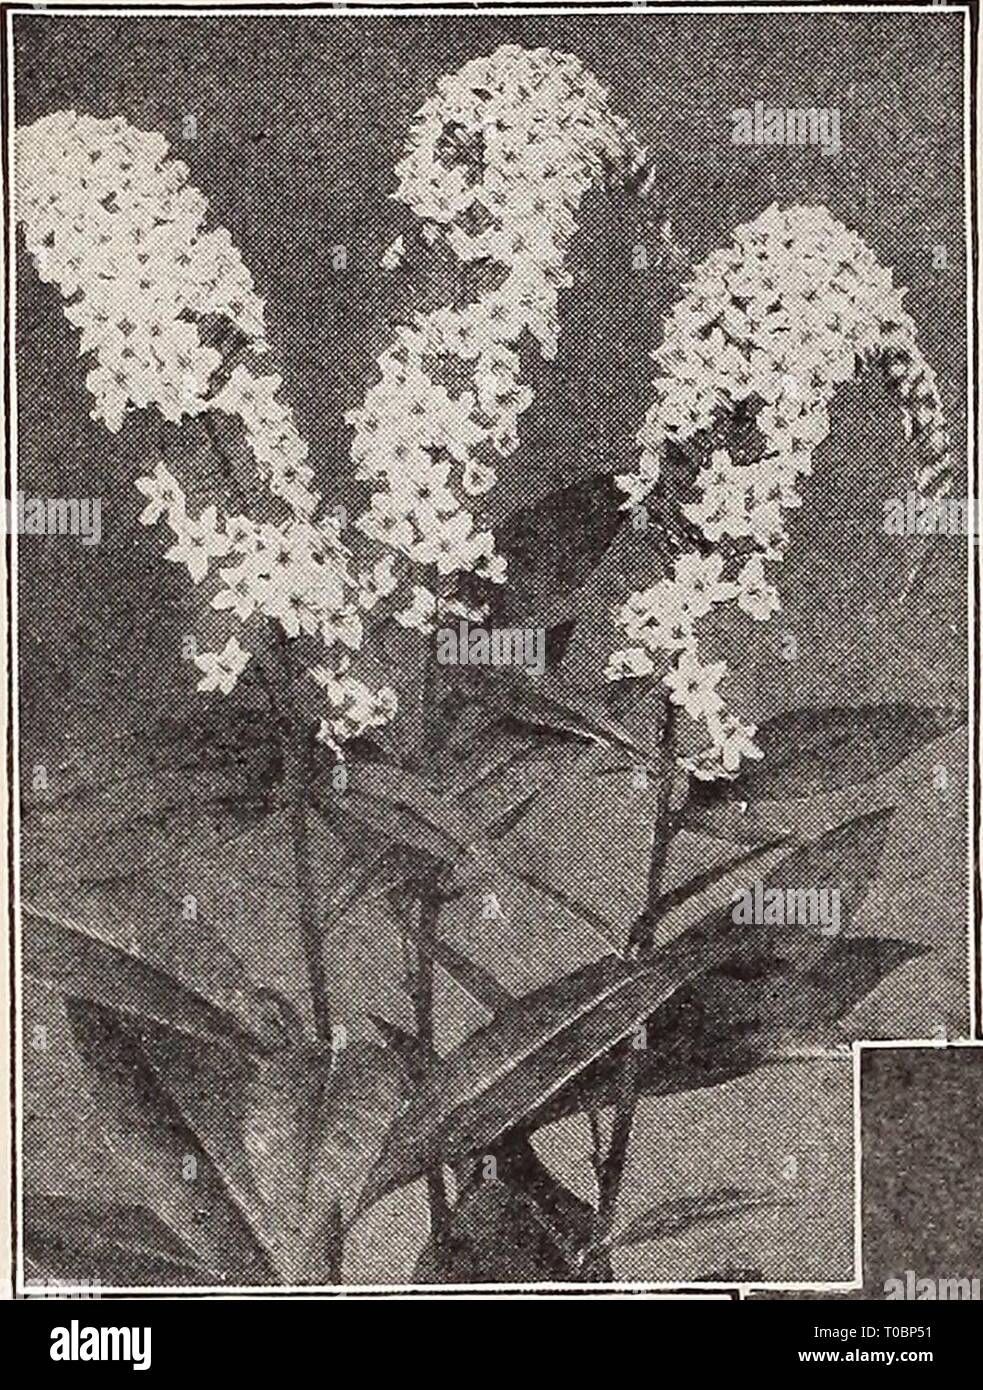 Dreer's garden book 1932 (1932) Dreer's garden book 1932 dreersgardenbook1932henr Year: 1932  k HARDY PERENNIAL PIANTS I,    Lysimachia Clethroides Incarvillea (Hardy Gloxinia) Delavayi. An interesting and showy plant for the hardy border, producing large glox- inia-like, rose-colored flowers on 15 to 18 inch high stems during June and July. Suc- ceeds either in sun or shade, but should be well protected with leaves or litter during the winter. 50 cts. each. Lavandula (Lavender) Vera. This is the true Sweet Lavender; grows about 18 inches high; delightfully fra- grant blue flowers in July and  Stock Photo